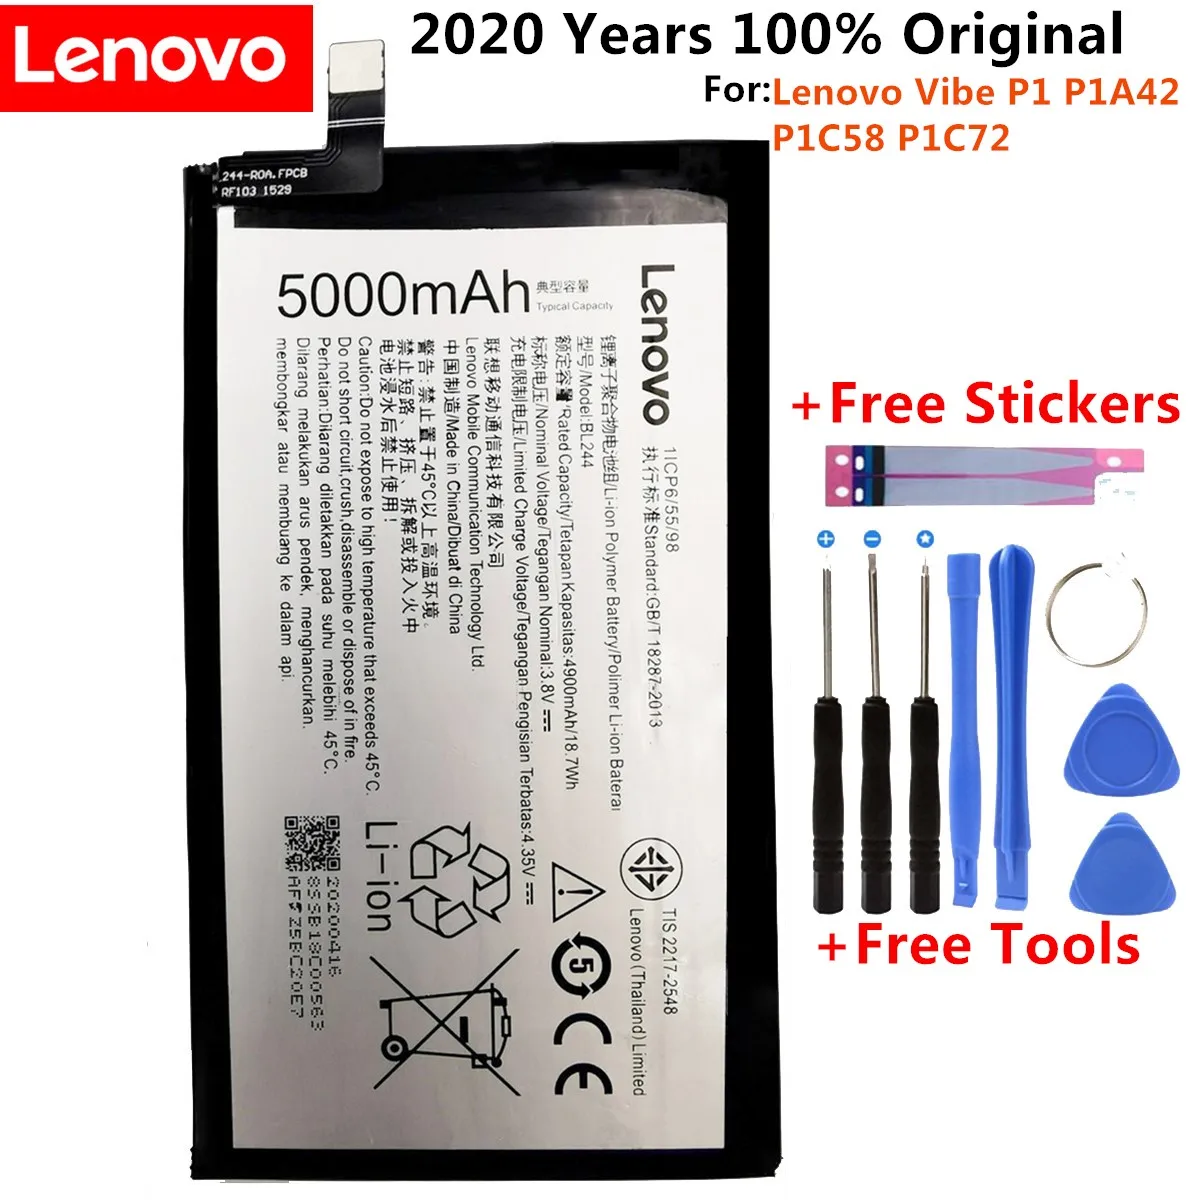 

100% Original New High quality Real 5000mAh BL244 battery Batterie for Lenovo Vibe P1 P1A42 P1C58 P1C72+Gift Tools +Stickers